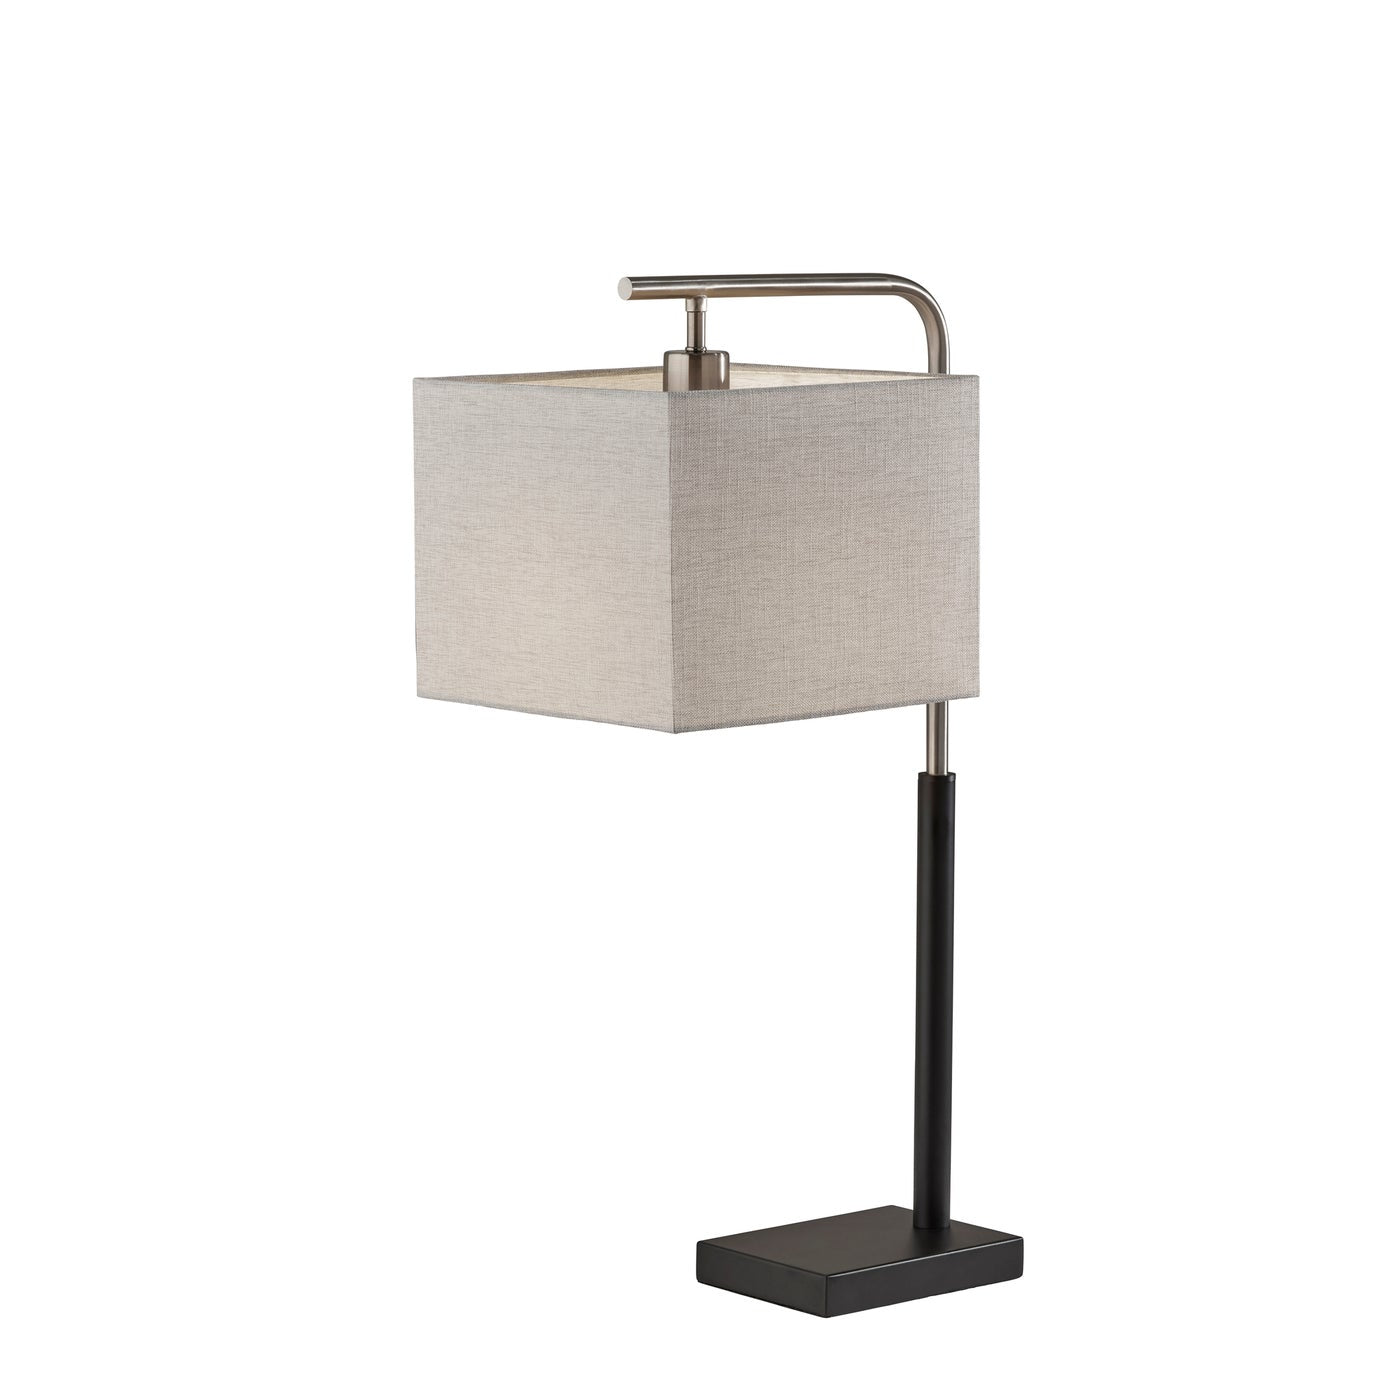 Adesso Home - 4182-22 - Table Lamp - Flora - Black & Brushed Steel